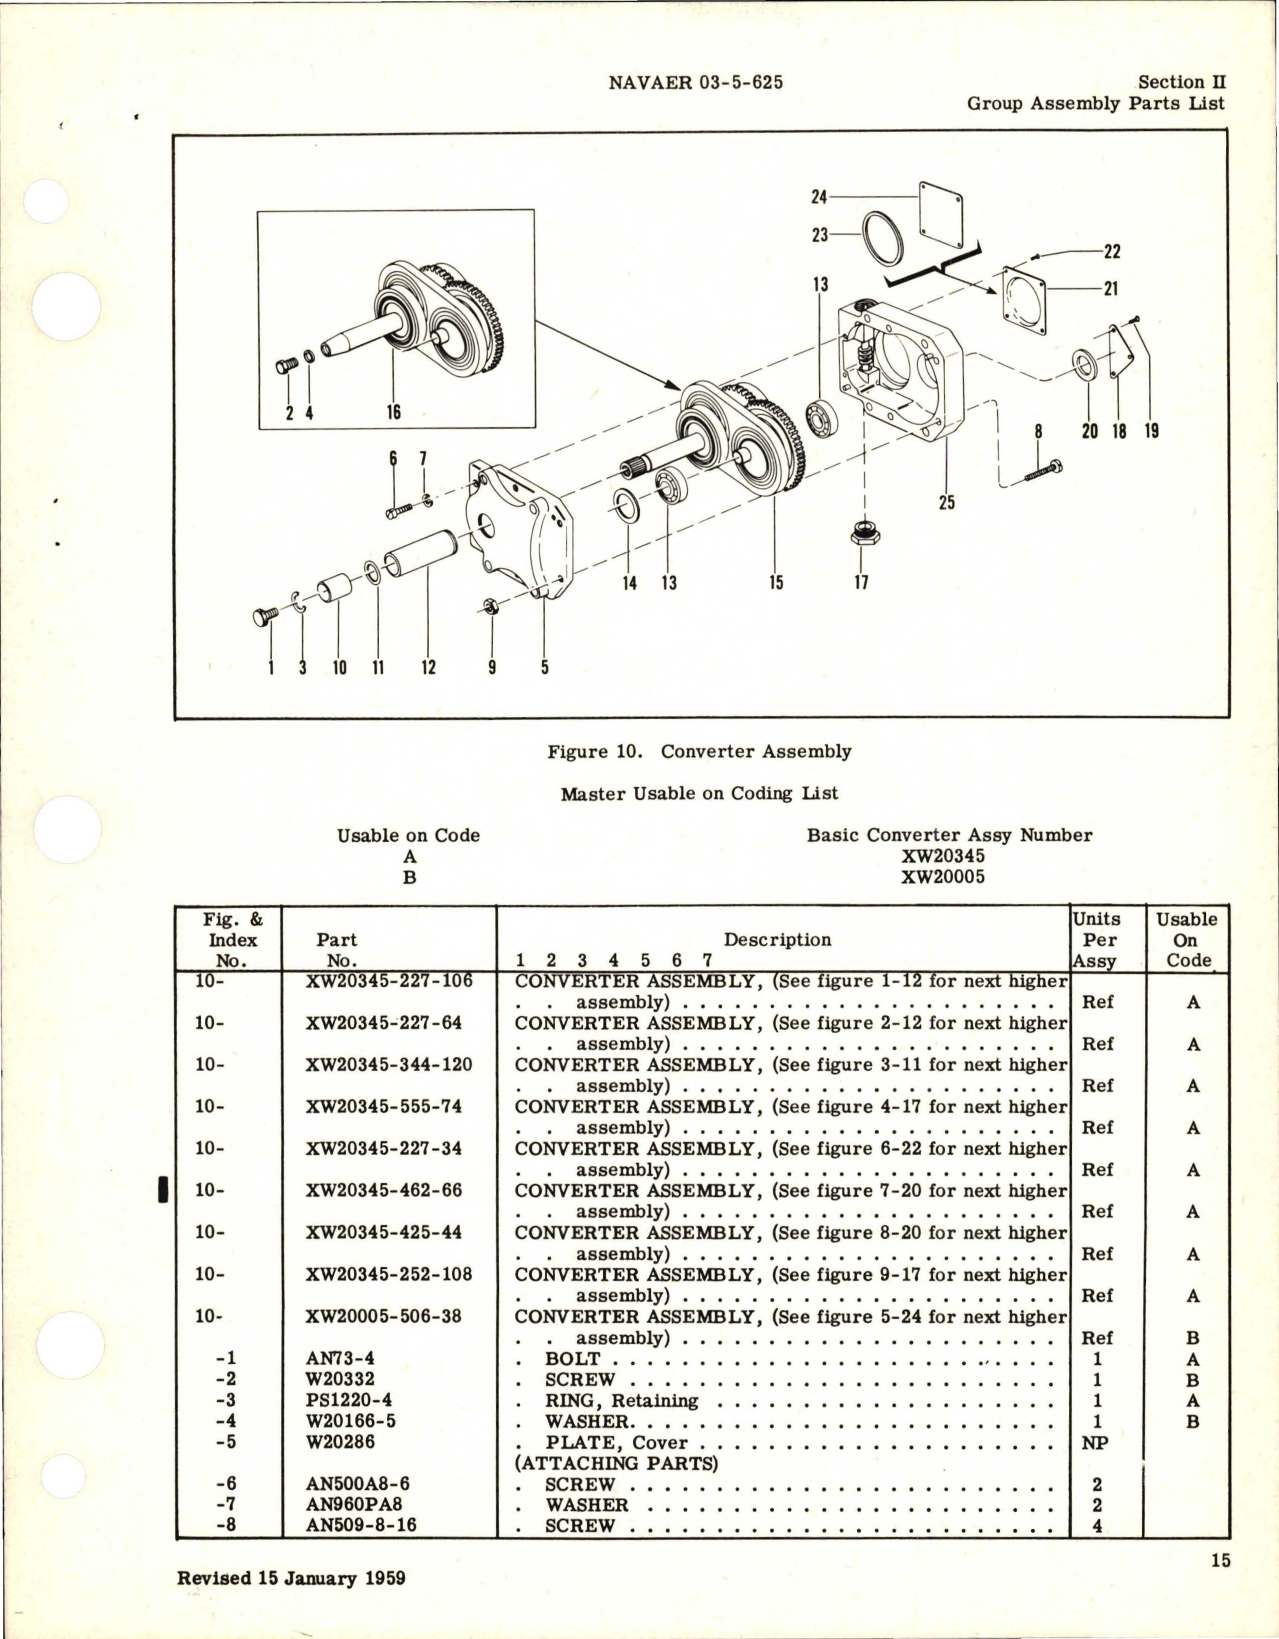 Sample page 5 from AirCorps Library document: Illustrated Parts Breakdown for Electric Windshield Wiper System 